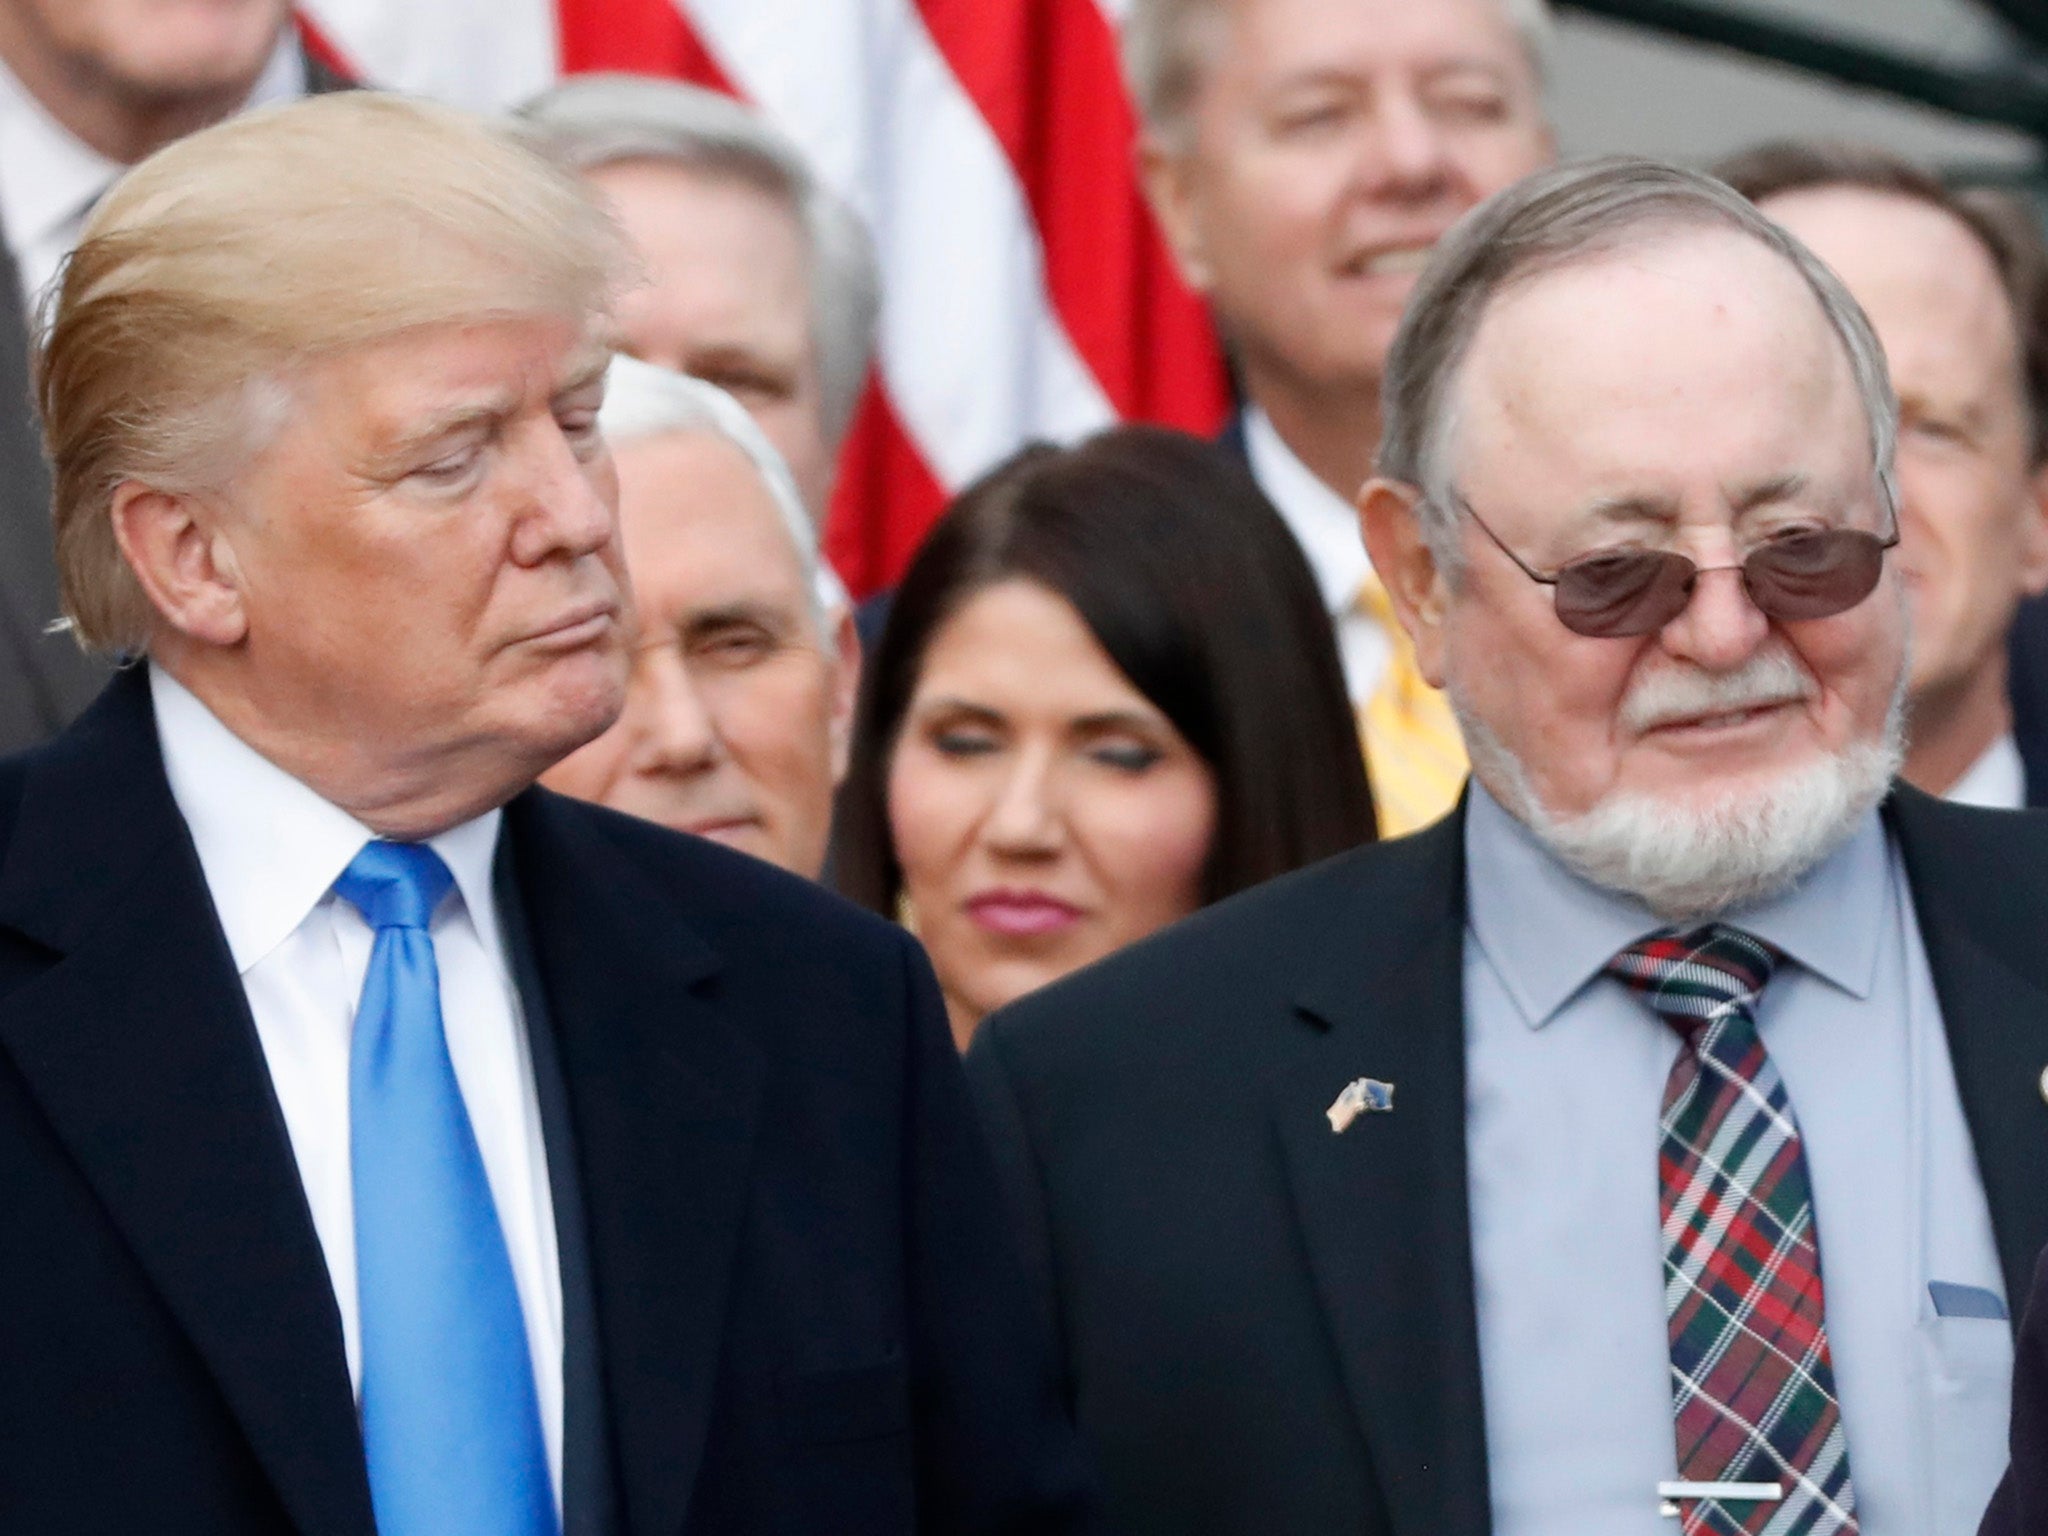 Donald Trump stands next to Alaska Congressman Don Young, who suggest Jews could have survived the holocaust if armed.